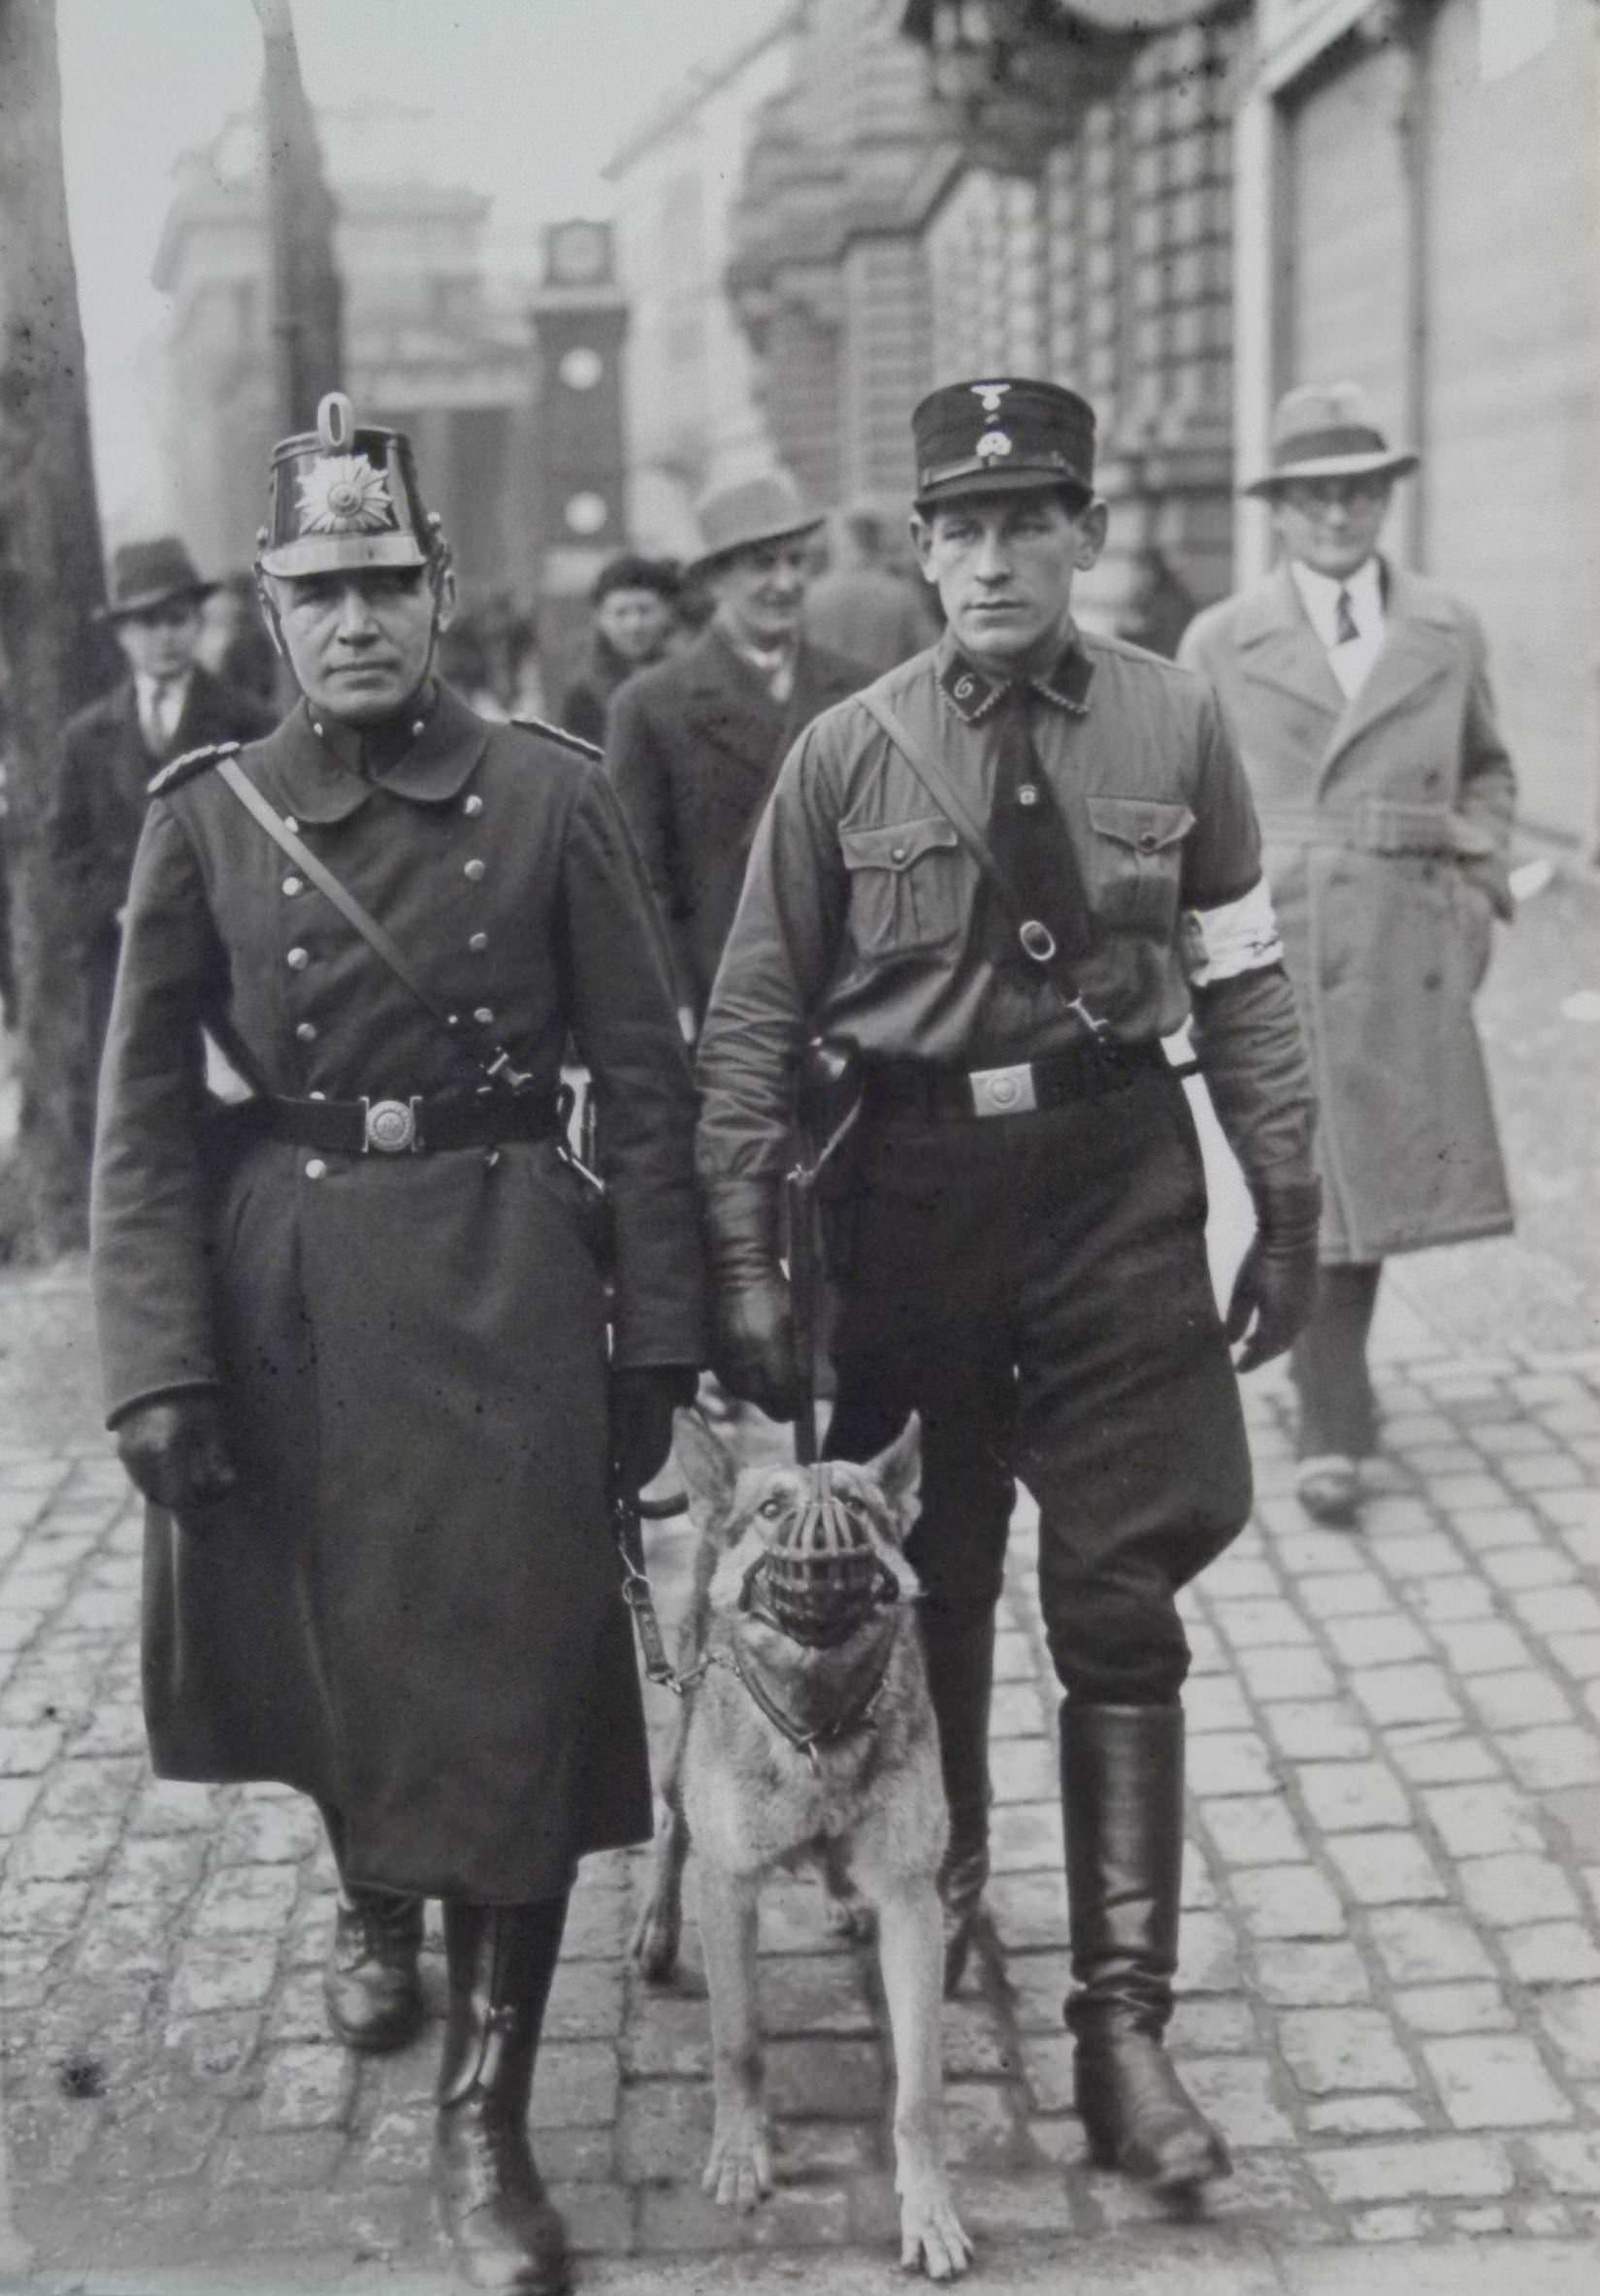 A Nazi official and a policeman patrol with an attack dog in Berlin, Germany in 1931. The dogs muzzle makes this picture.